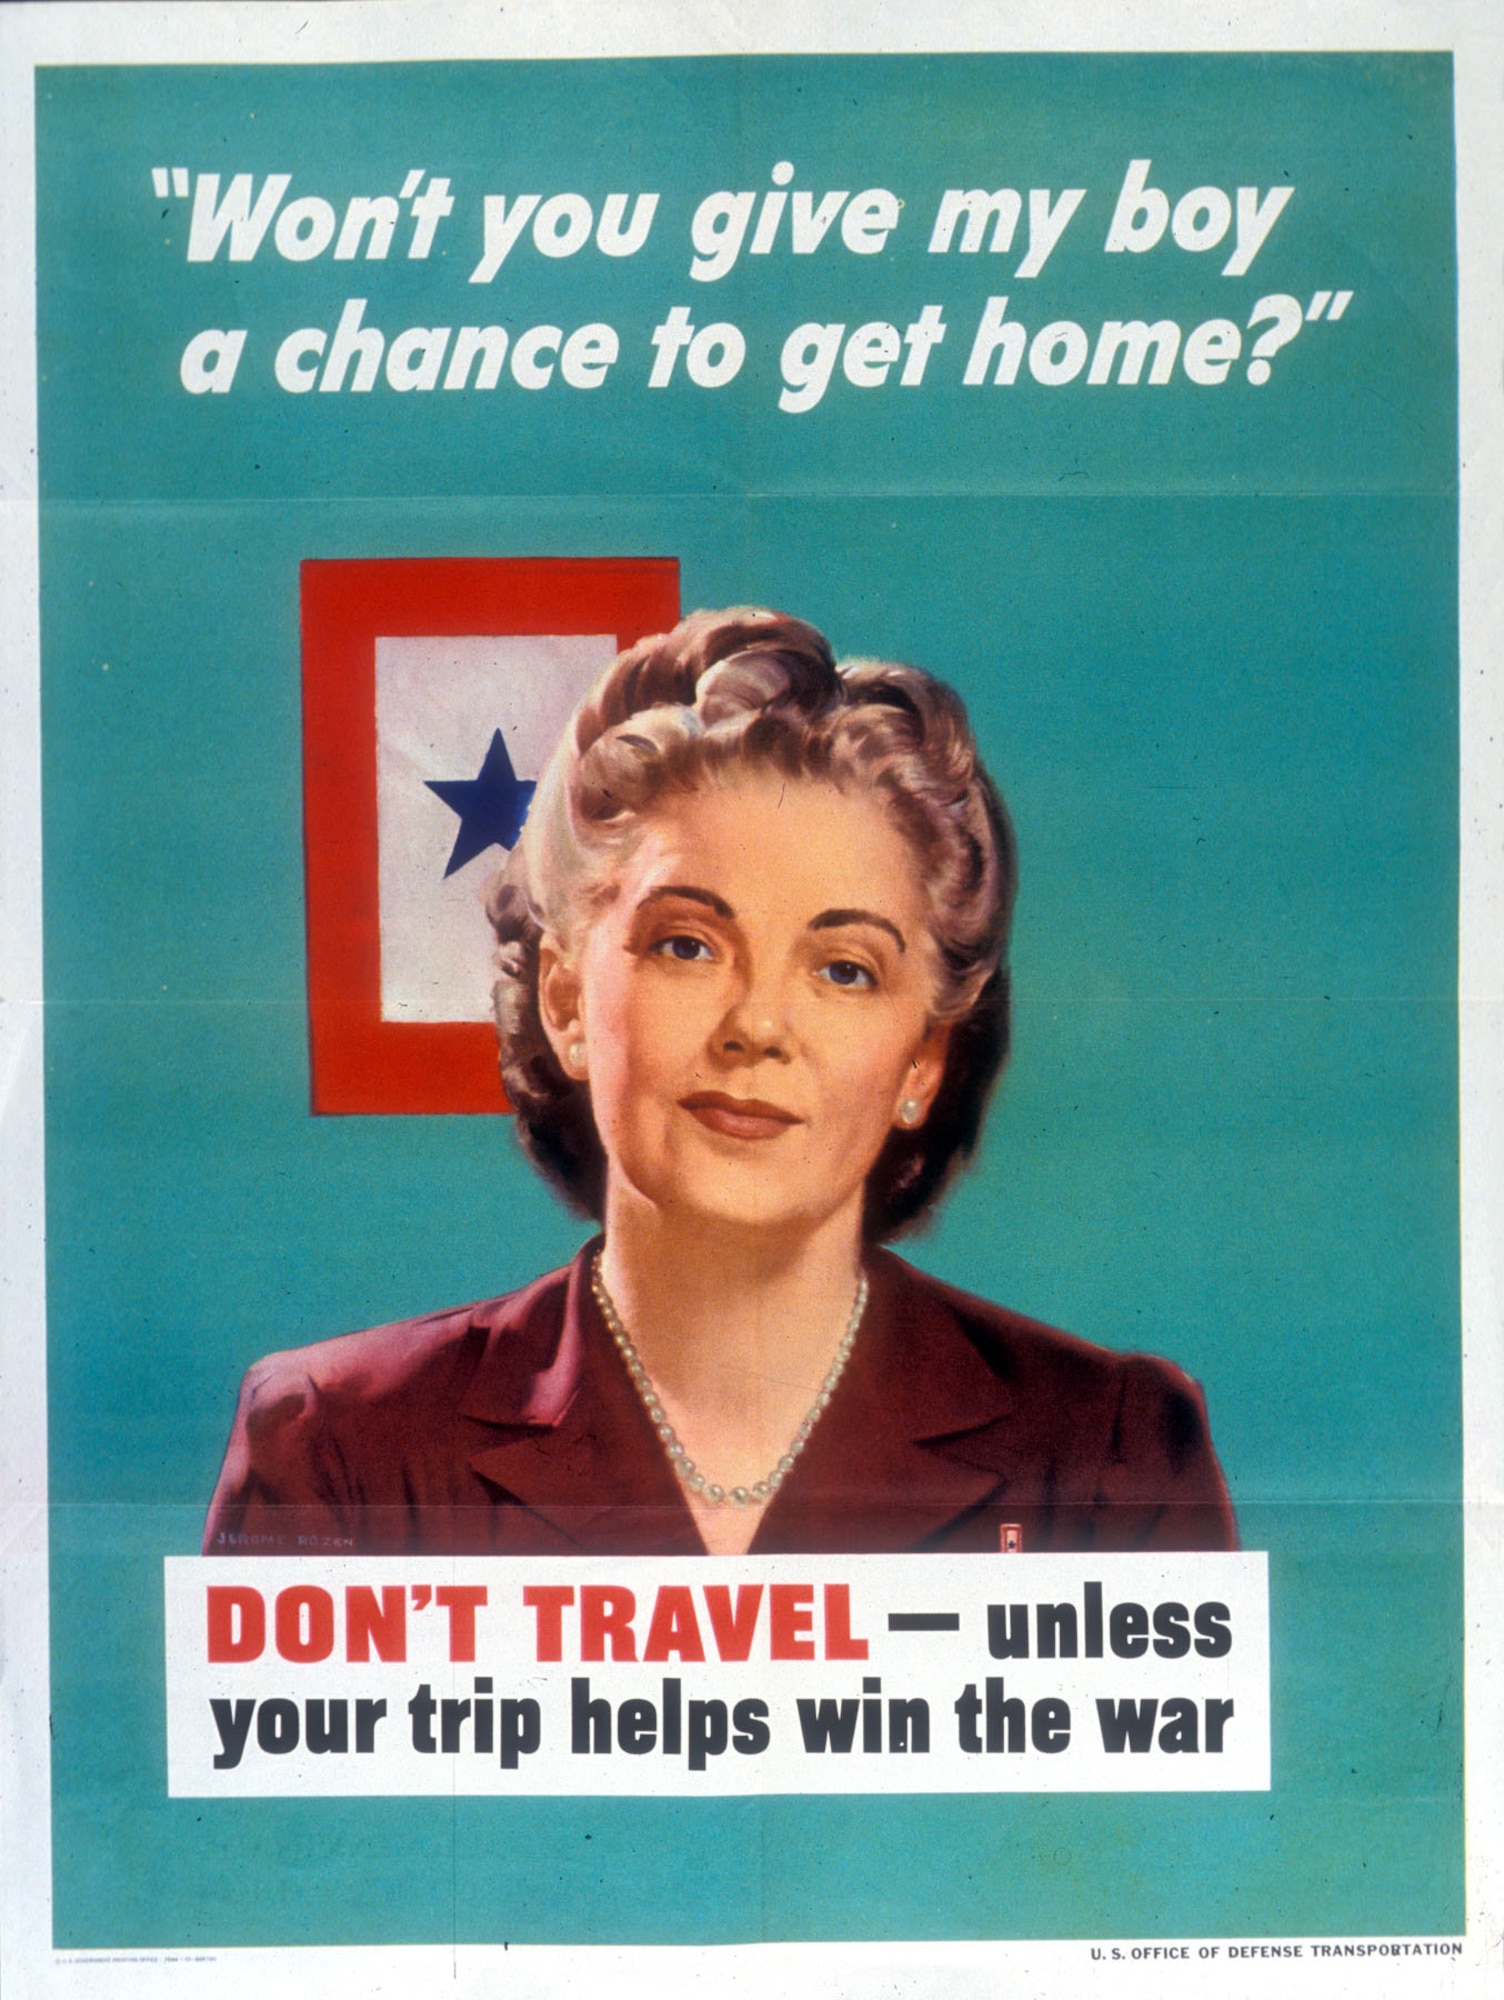 A service flag and mother are powerful symbols in this World War II poster. Gasoline and rubber for tires were urgently needed to win the war and give her boy “a chance to get home.” Office of Defense Transportation, 1944.